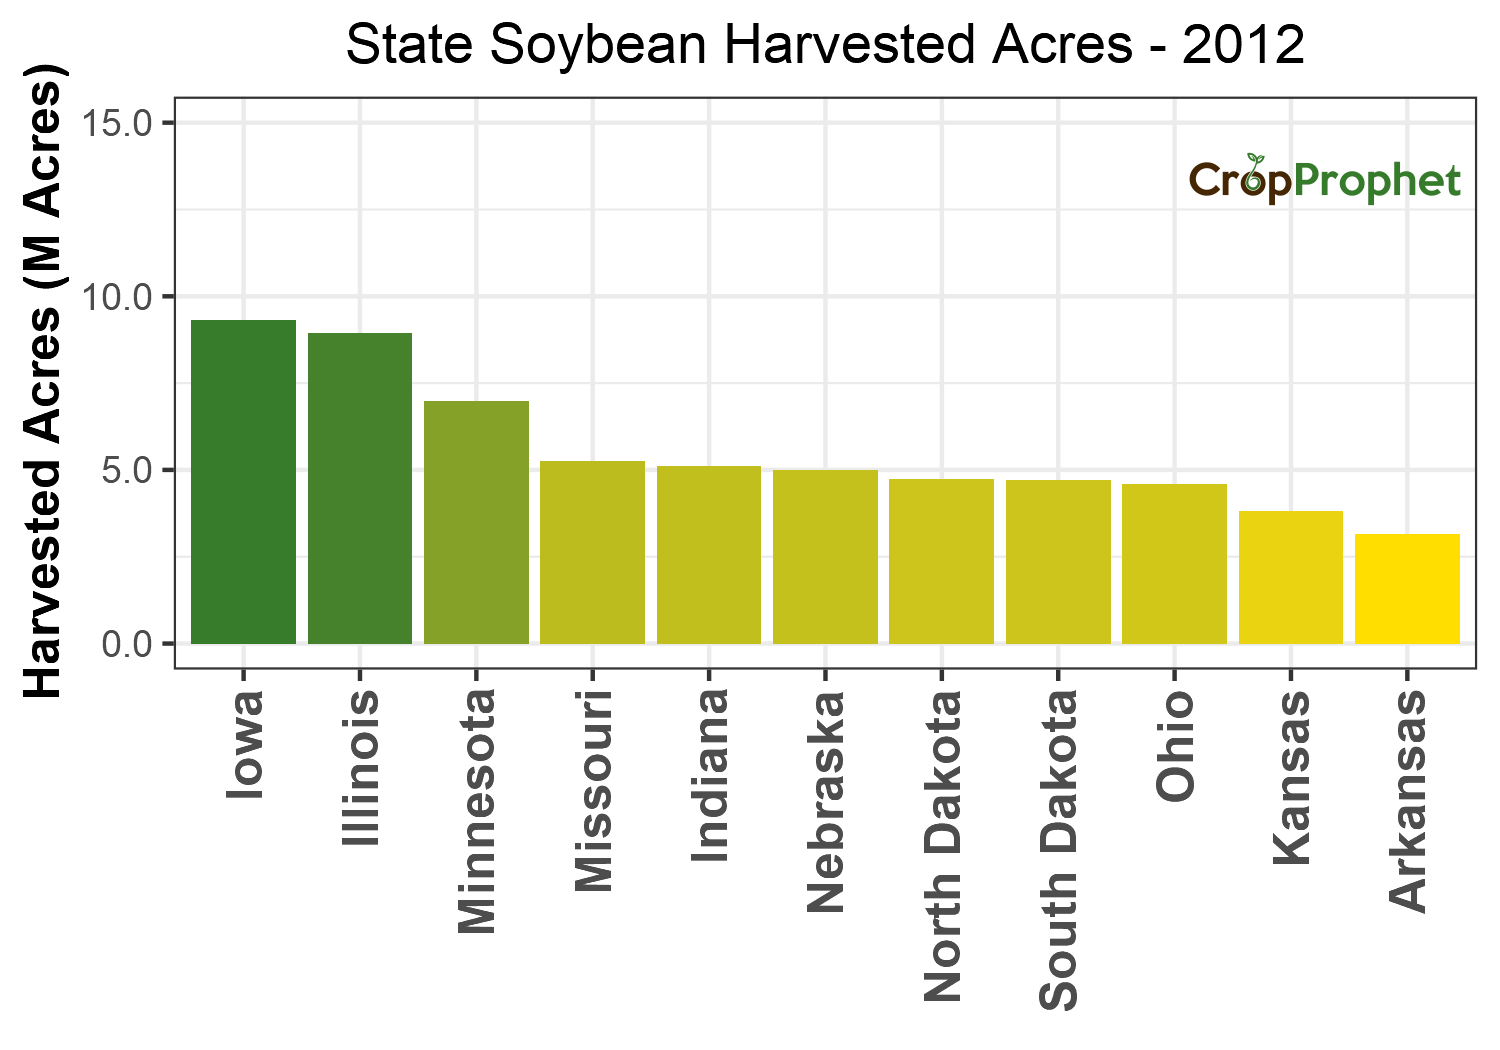 Soybean Harvested Acres by State - 2012 Rankings